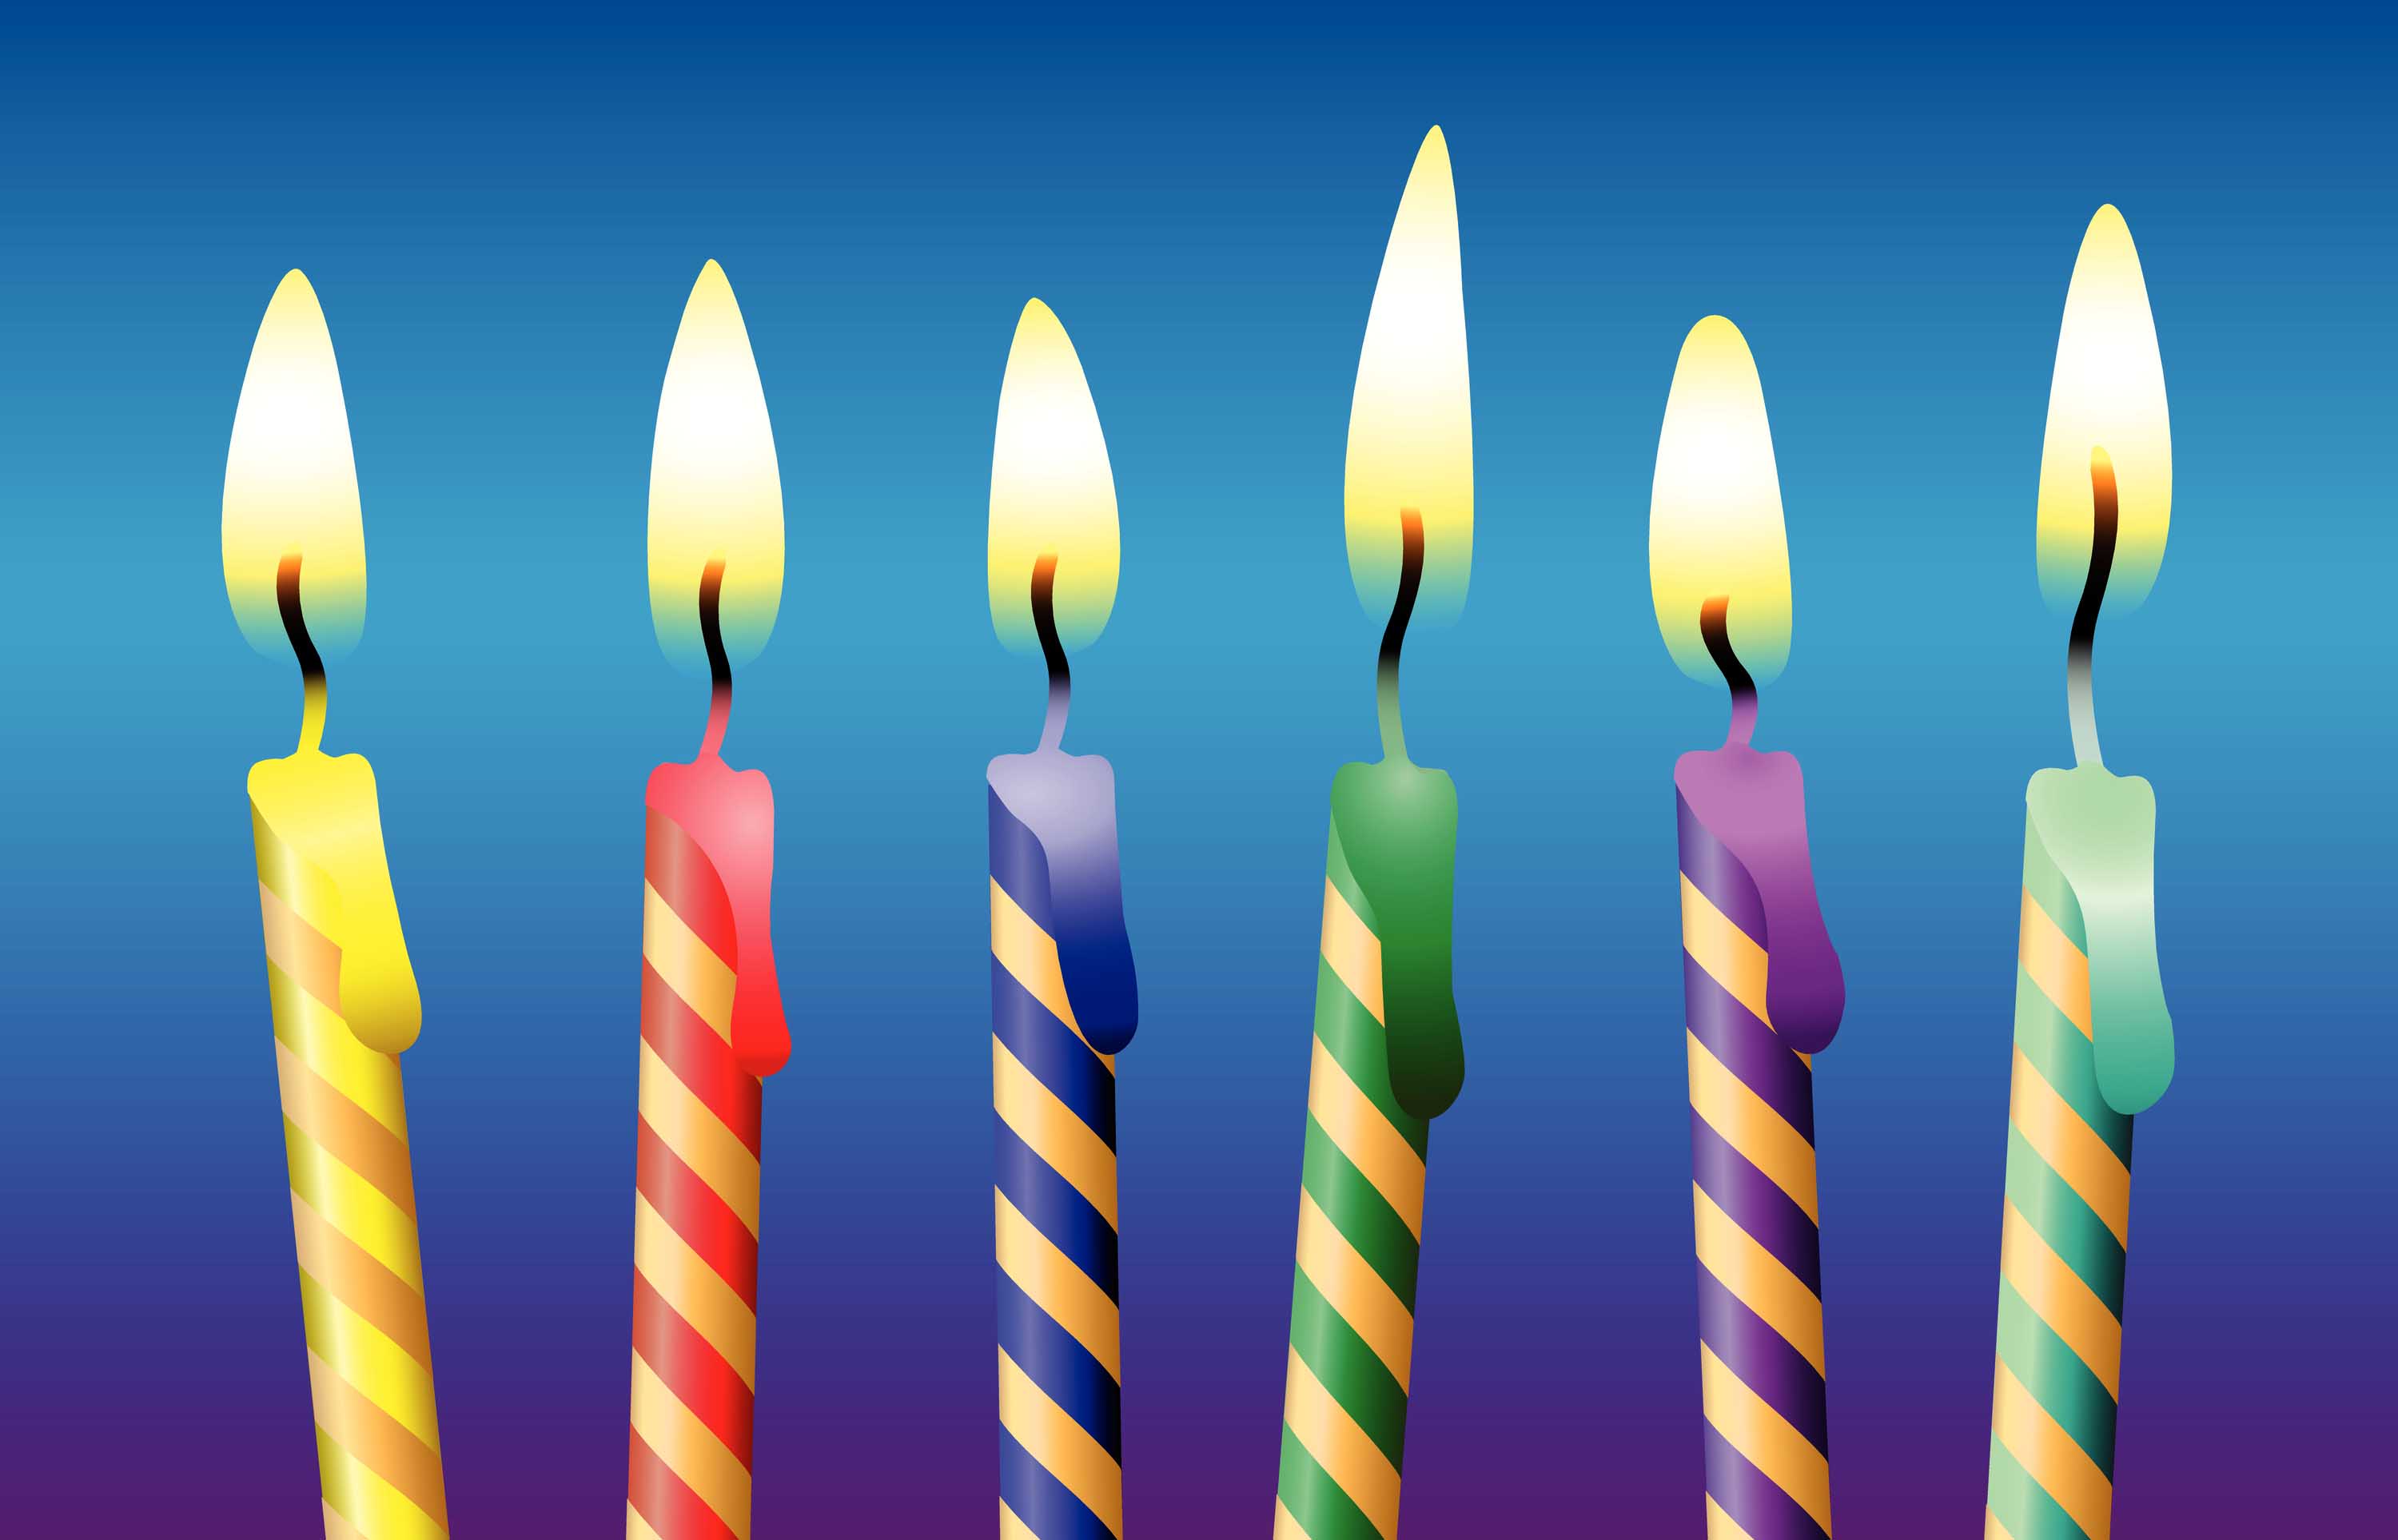 A picture of birthday candles